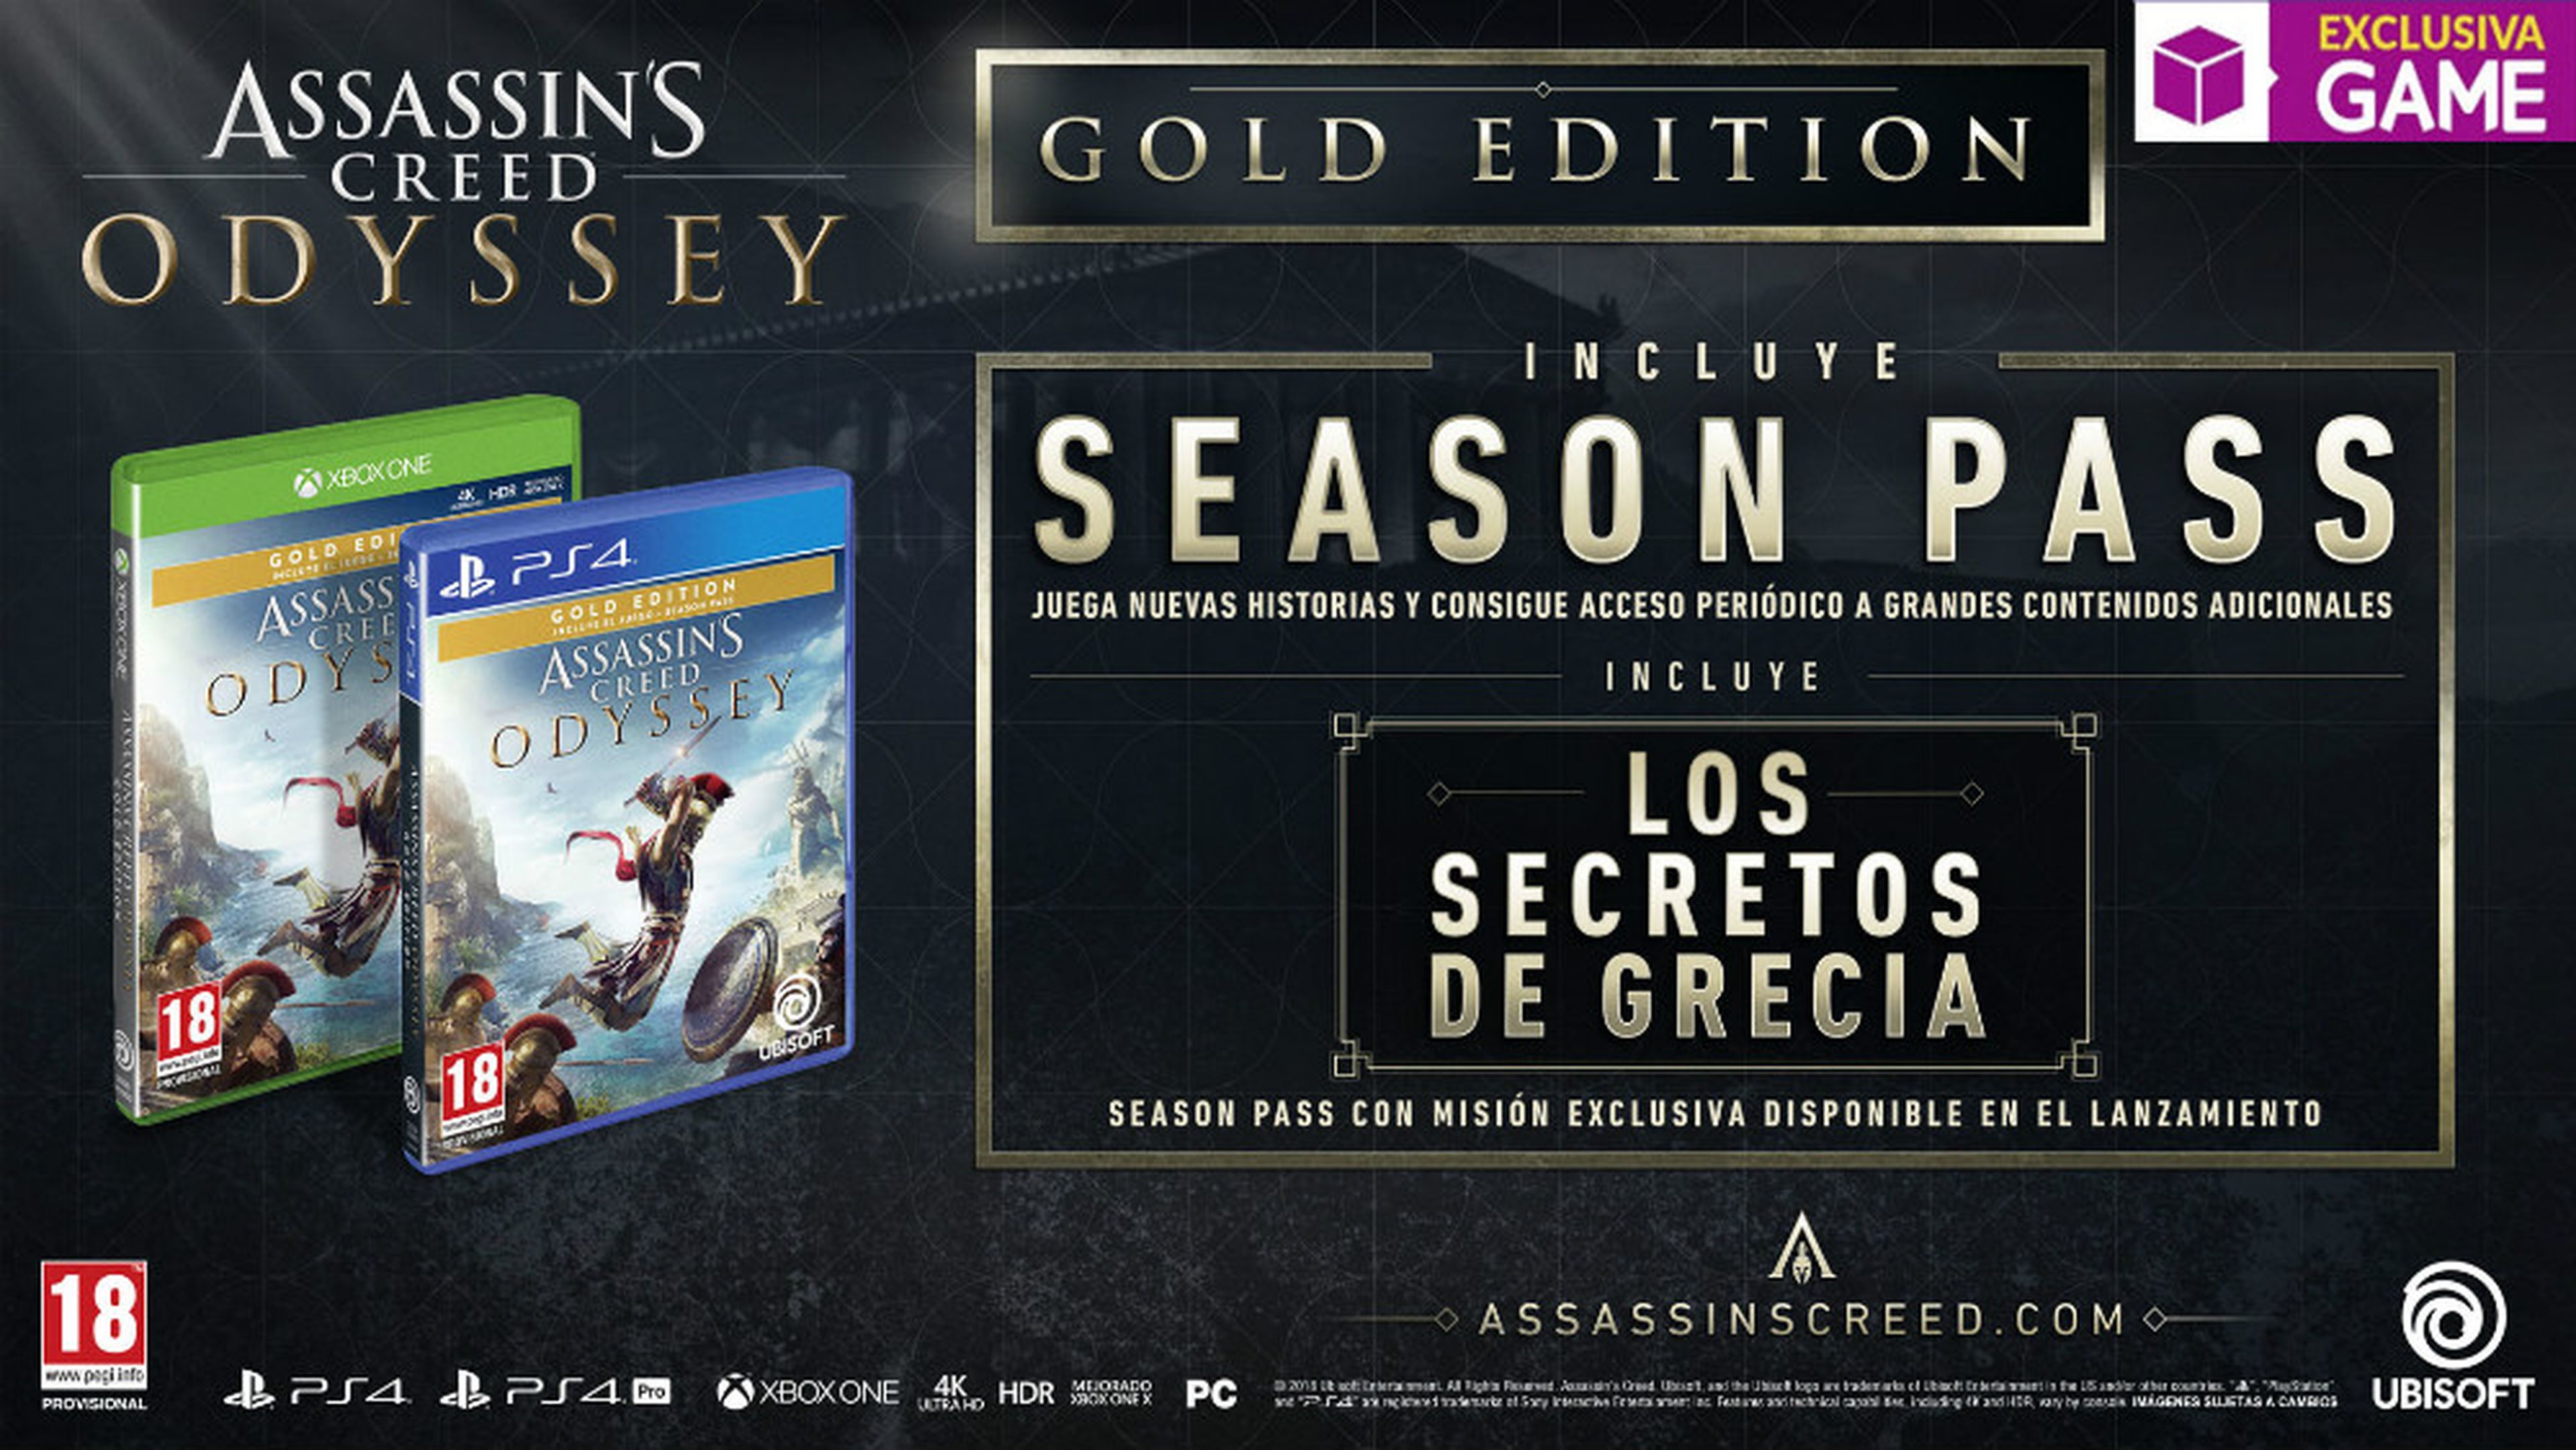 Assassin's Creed Odyssey Gold Edition en GAME